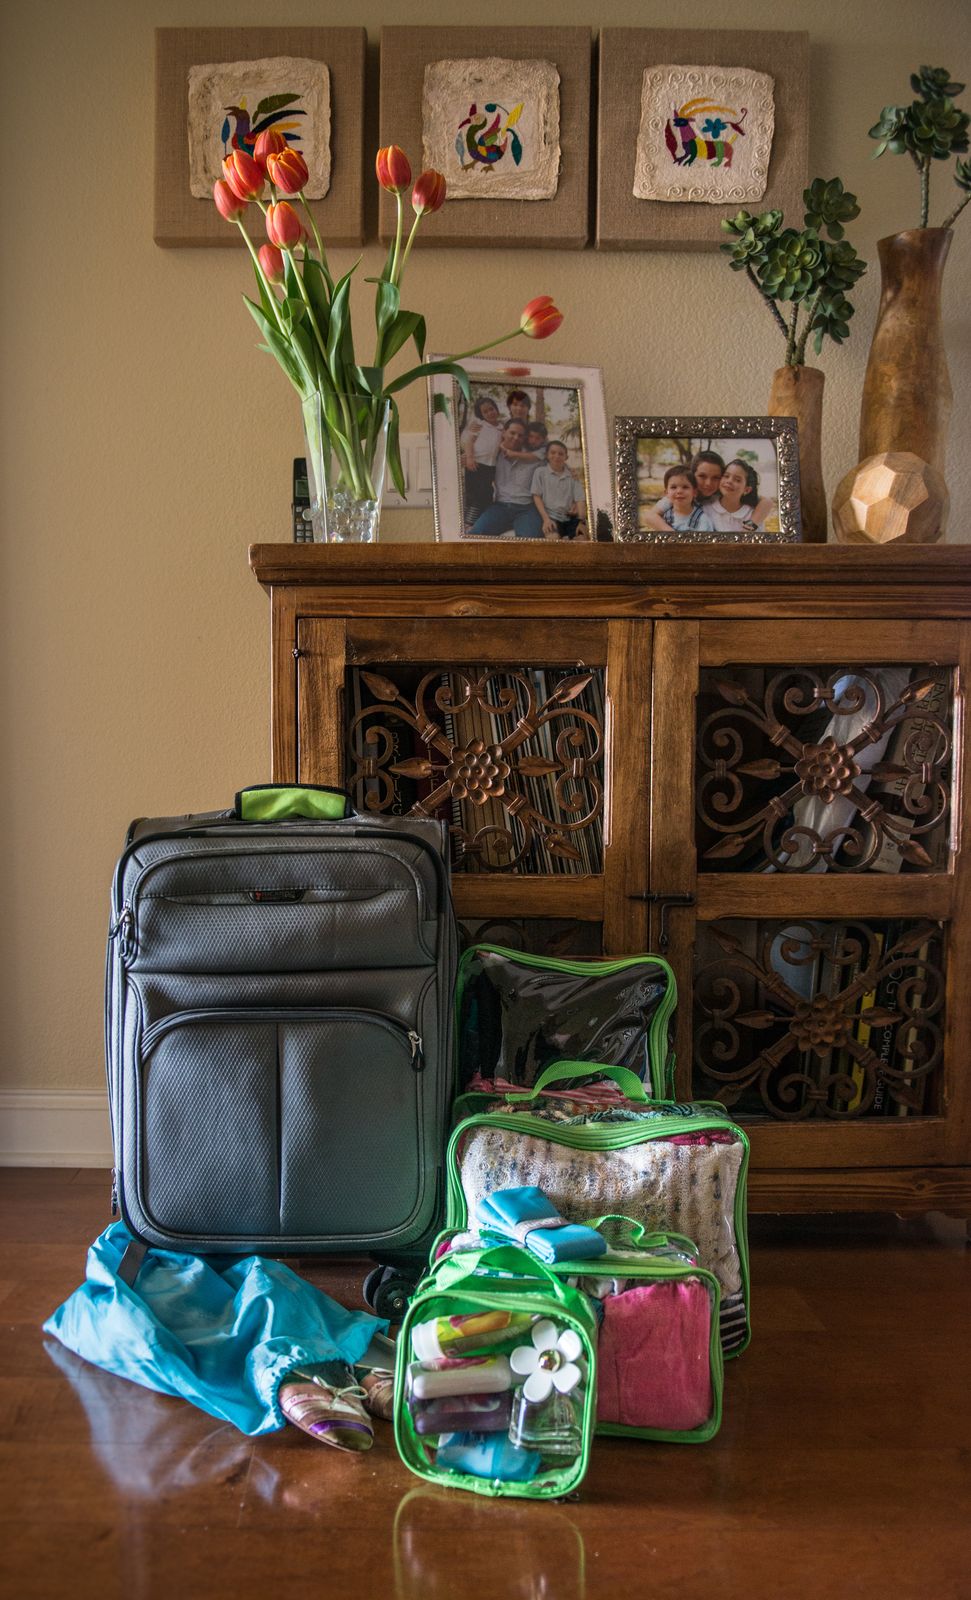 packing cubes beside a carryon suitcase